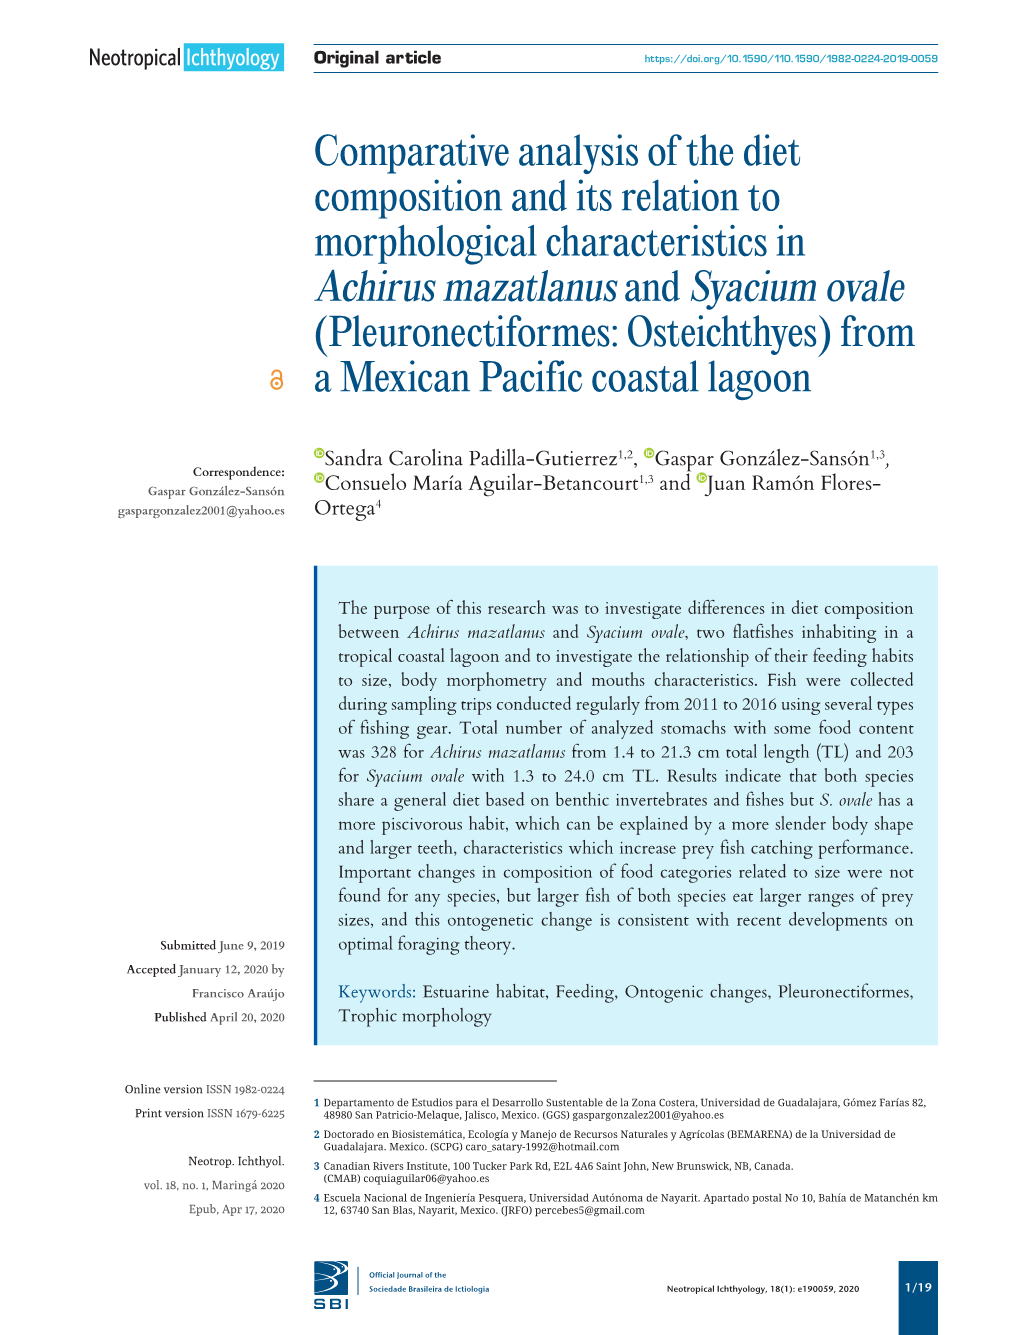 Comparative Analysis of the Diet Composition and Its Relation To